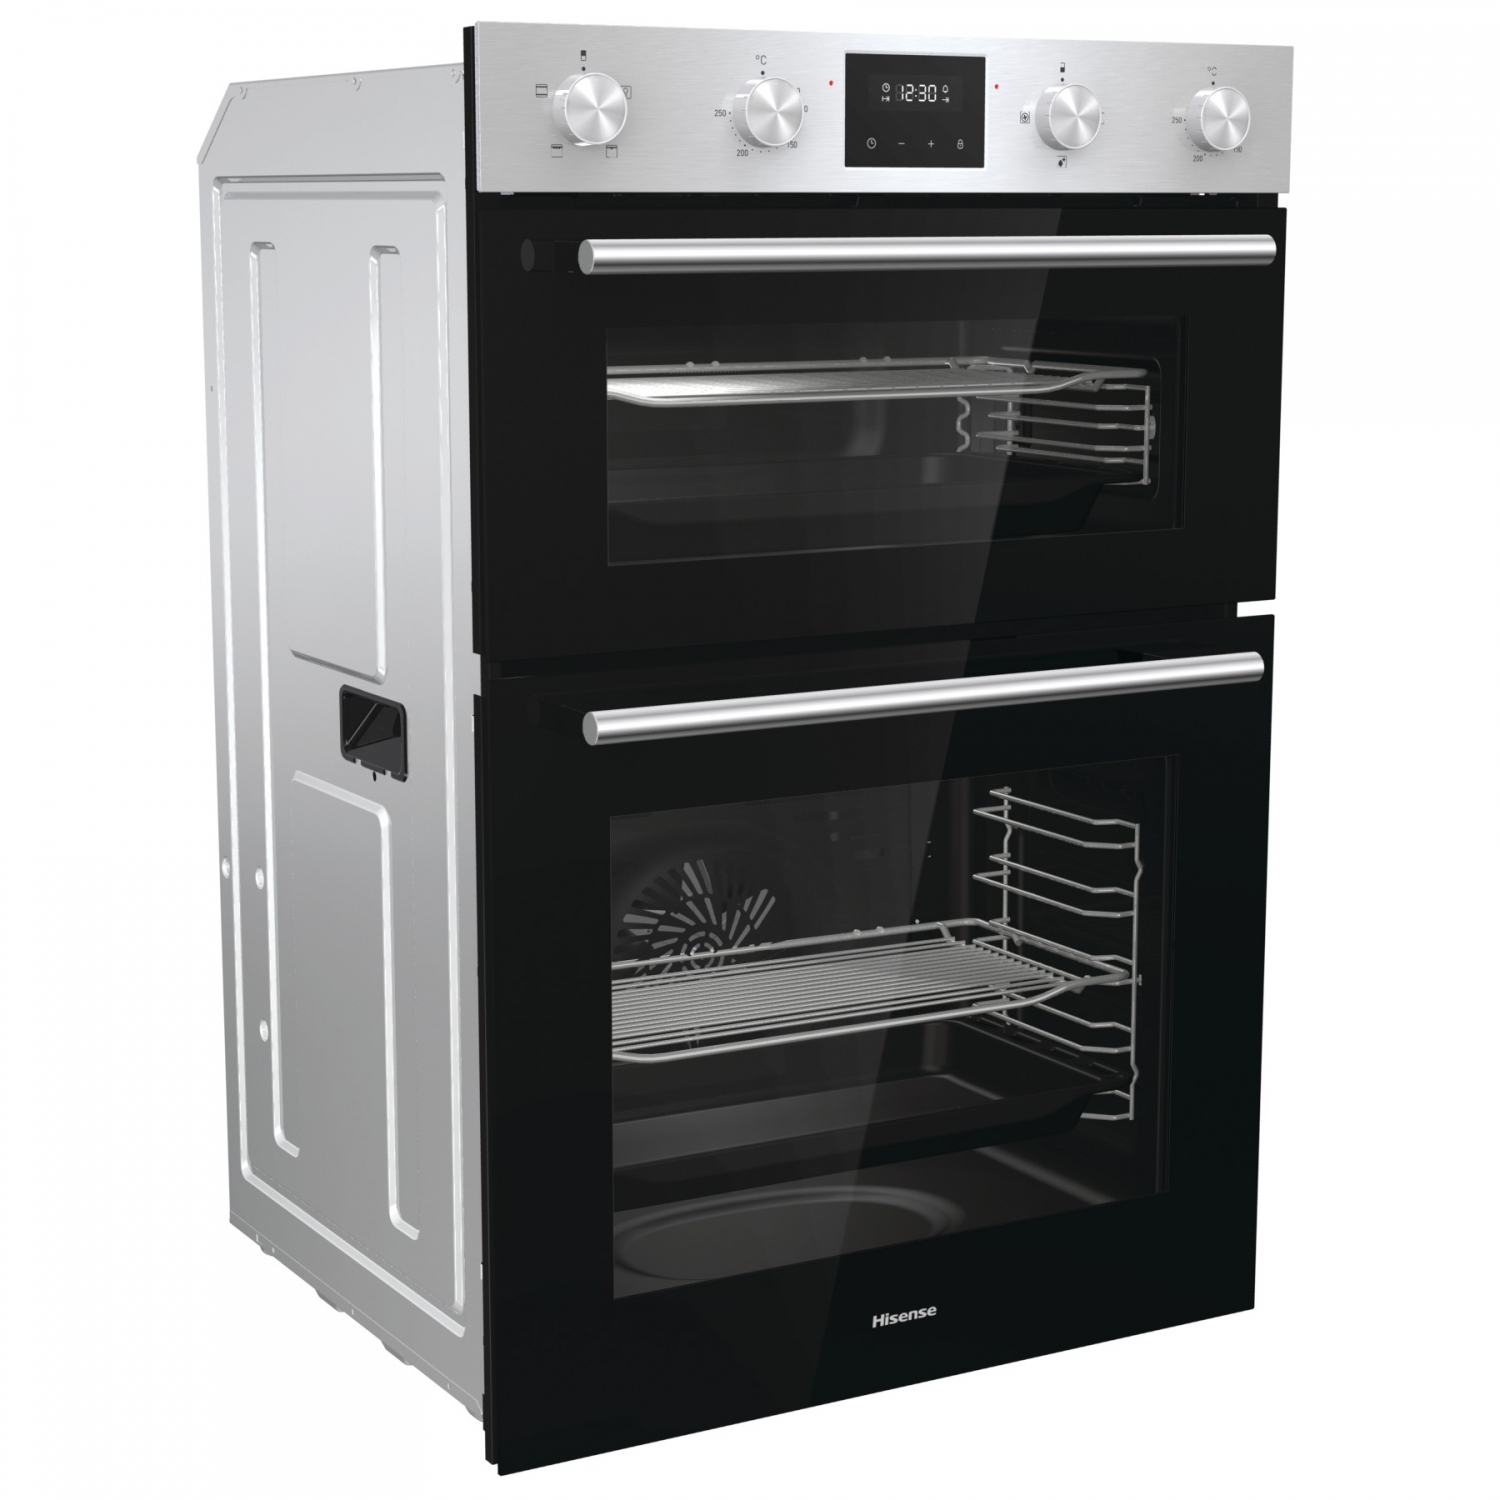 Hisense BID95211XUK 59.4cm Built In Electric Double Oven - Stainless Steel - 3